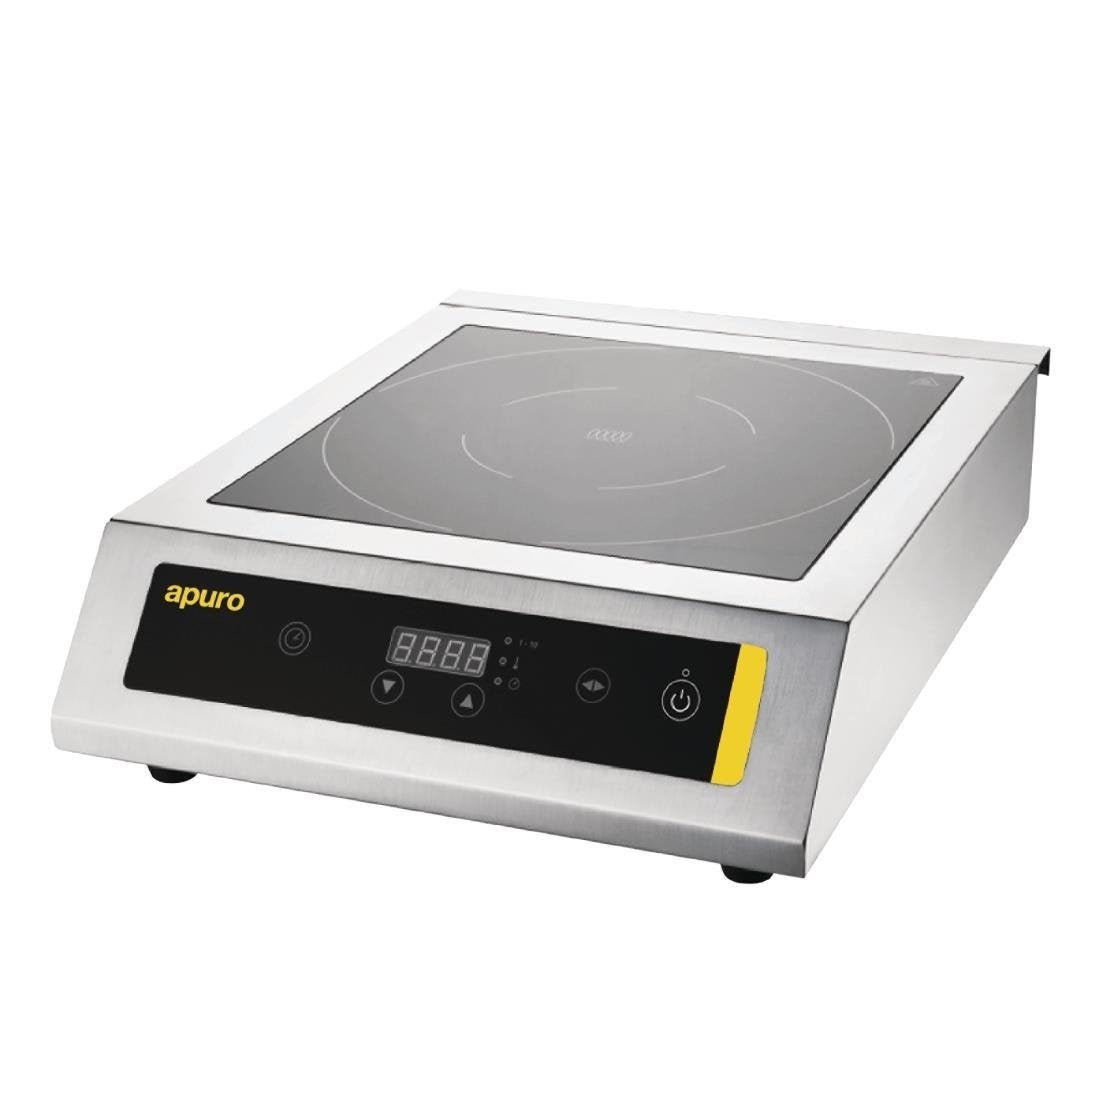 Apuro Heavy Duty Induction Cooktop 3kW CP799-A Induction Cooking